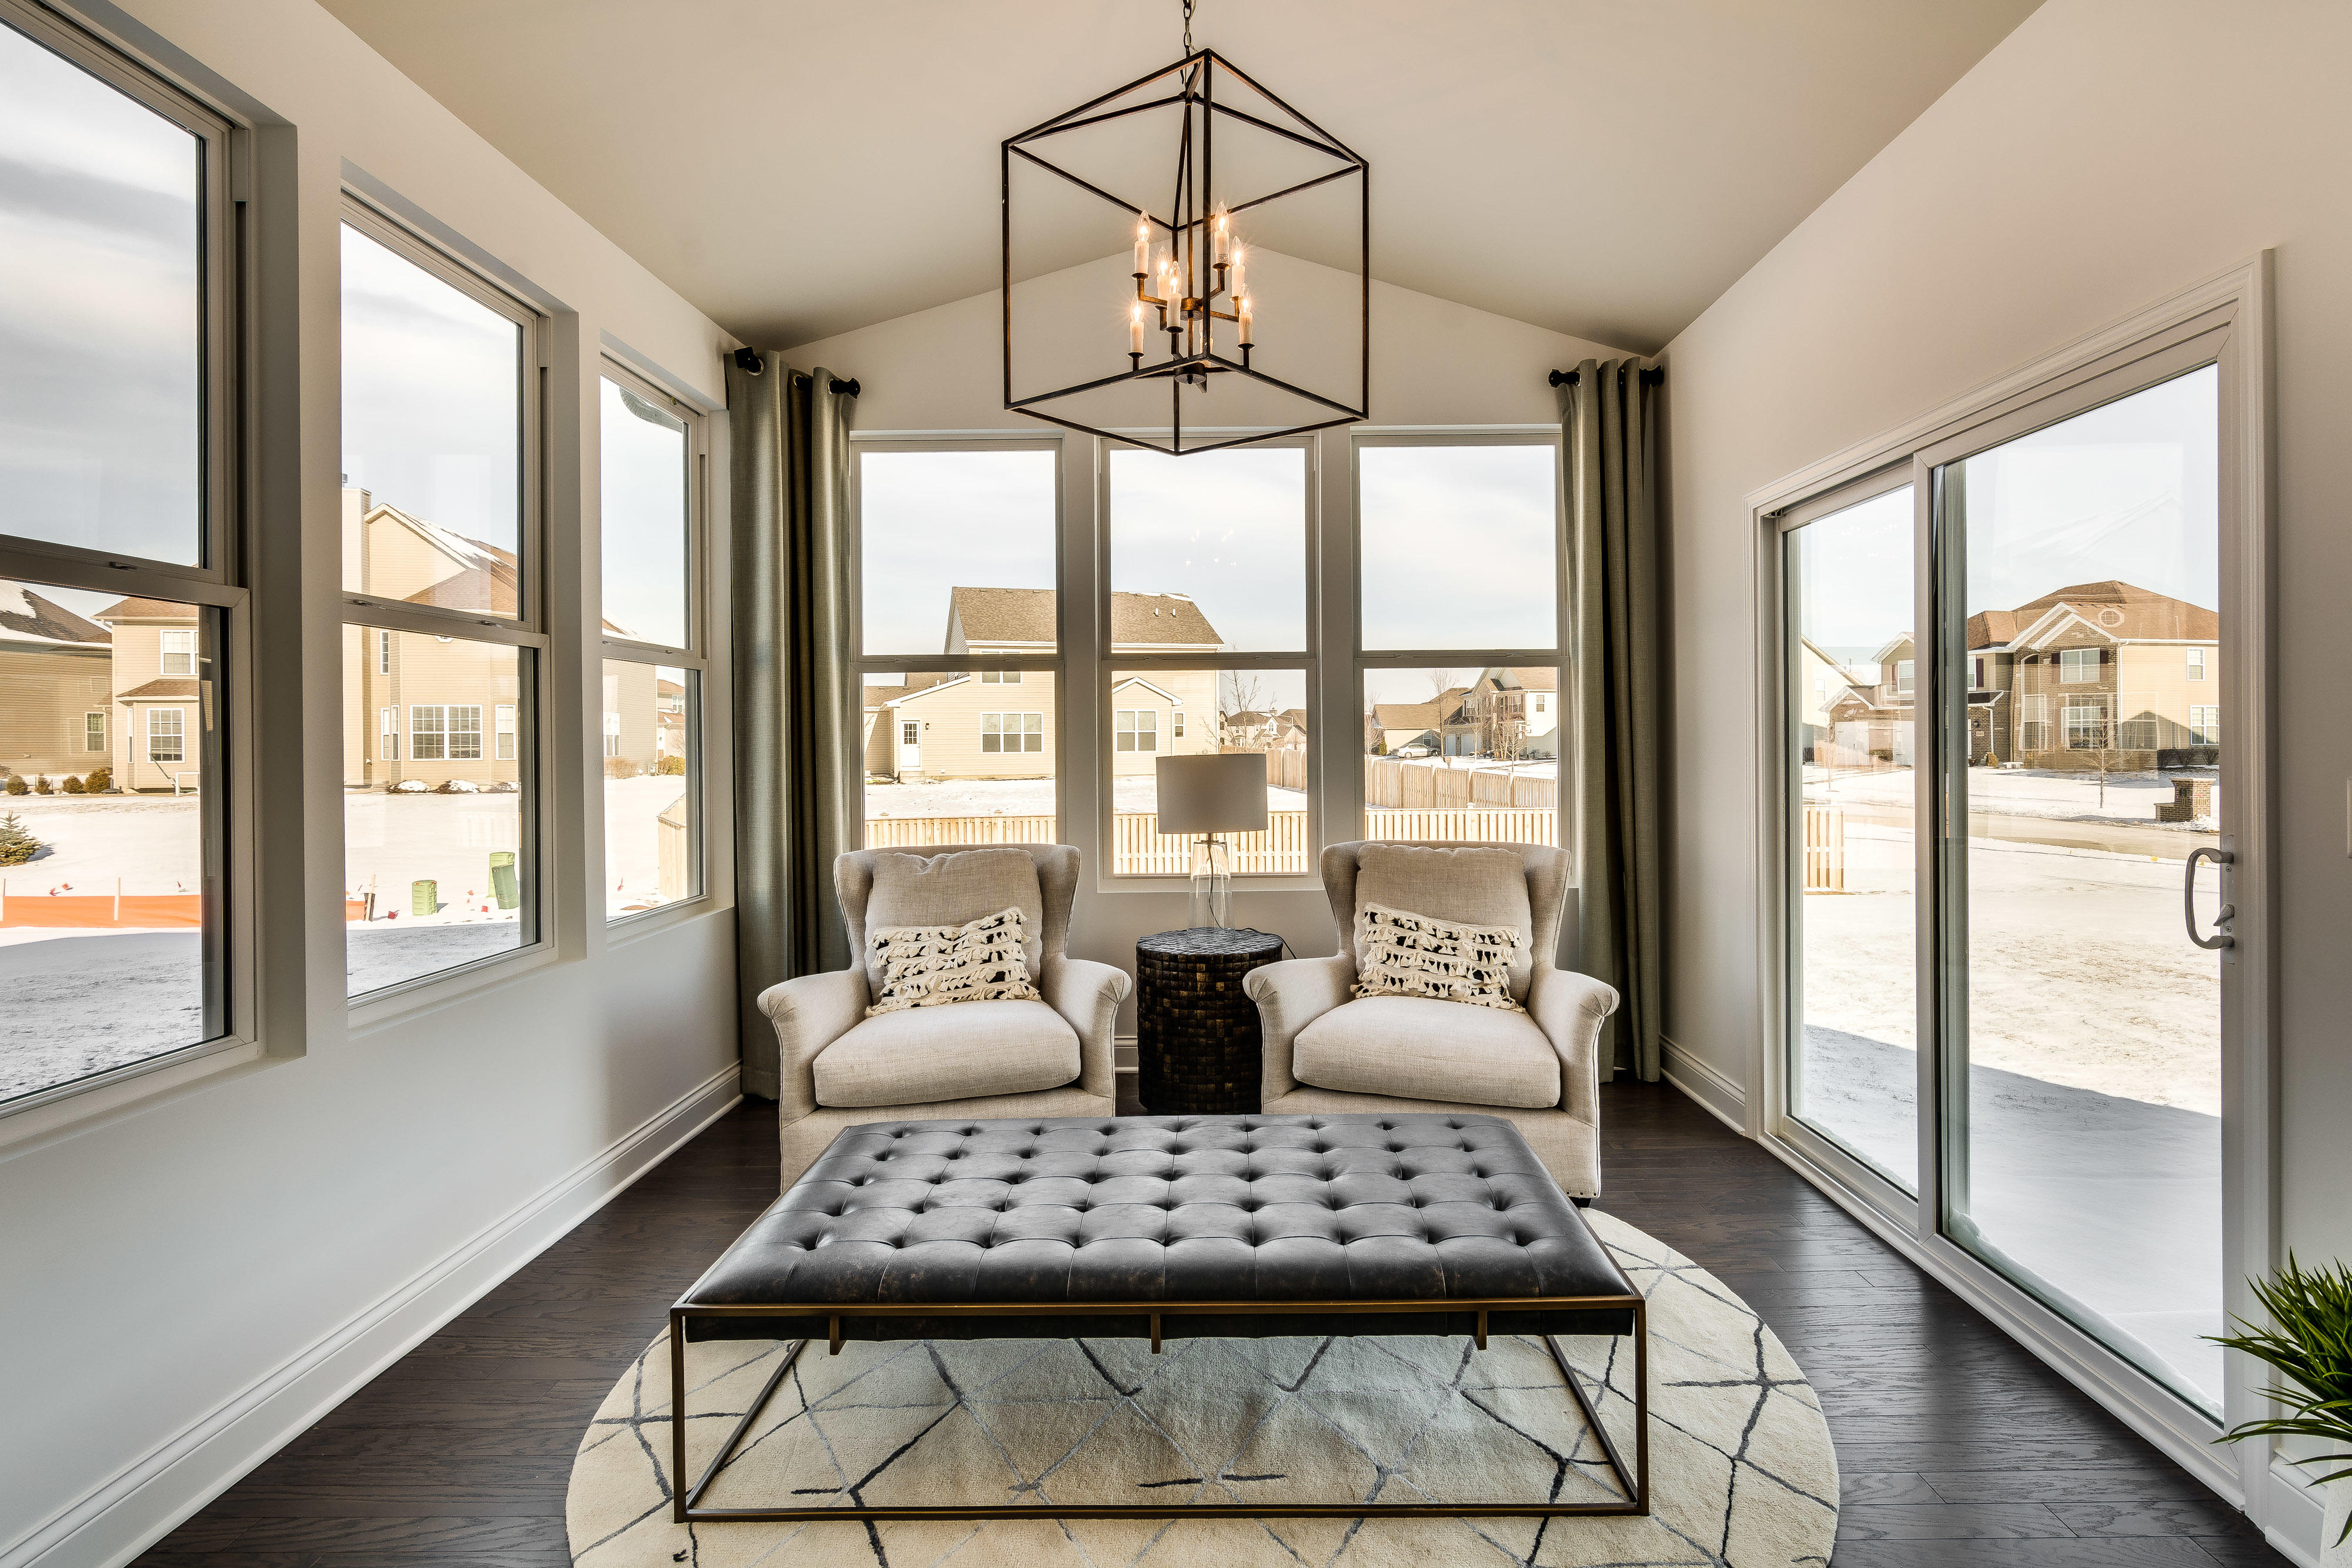 Creekside Crossing by Pulte Homes Photo